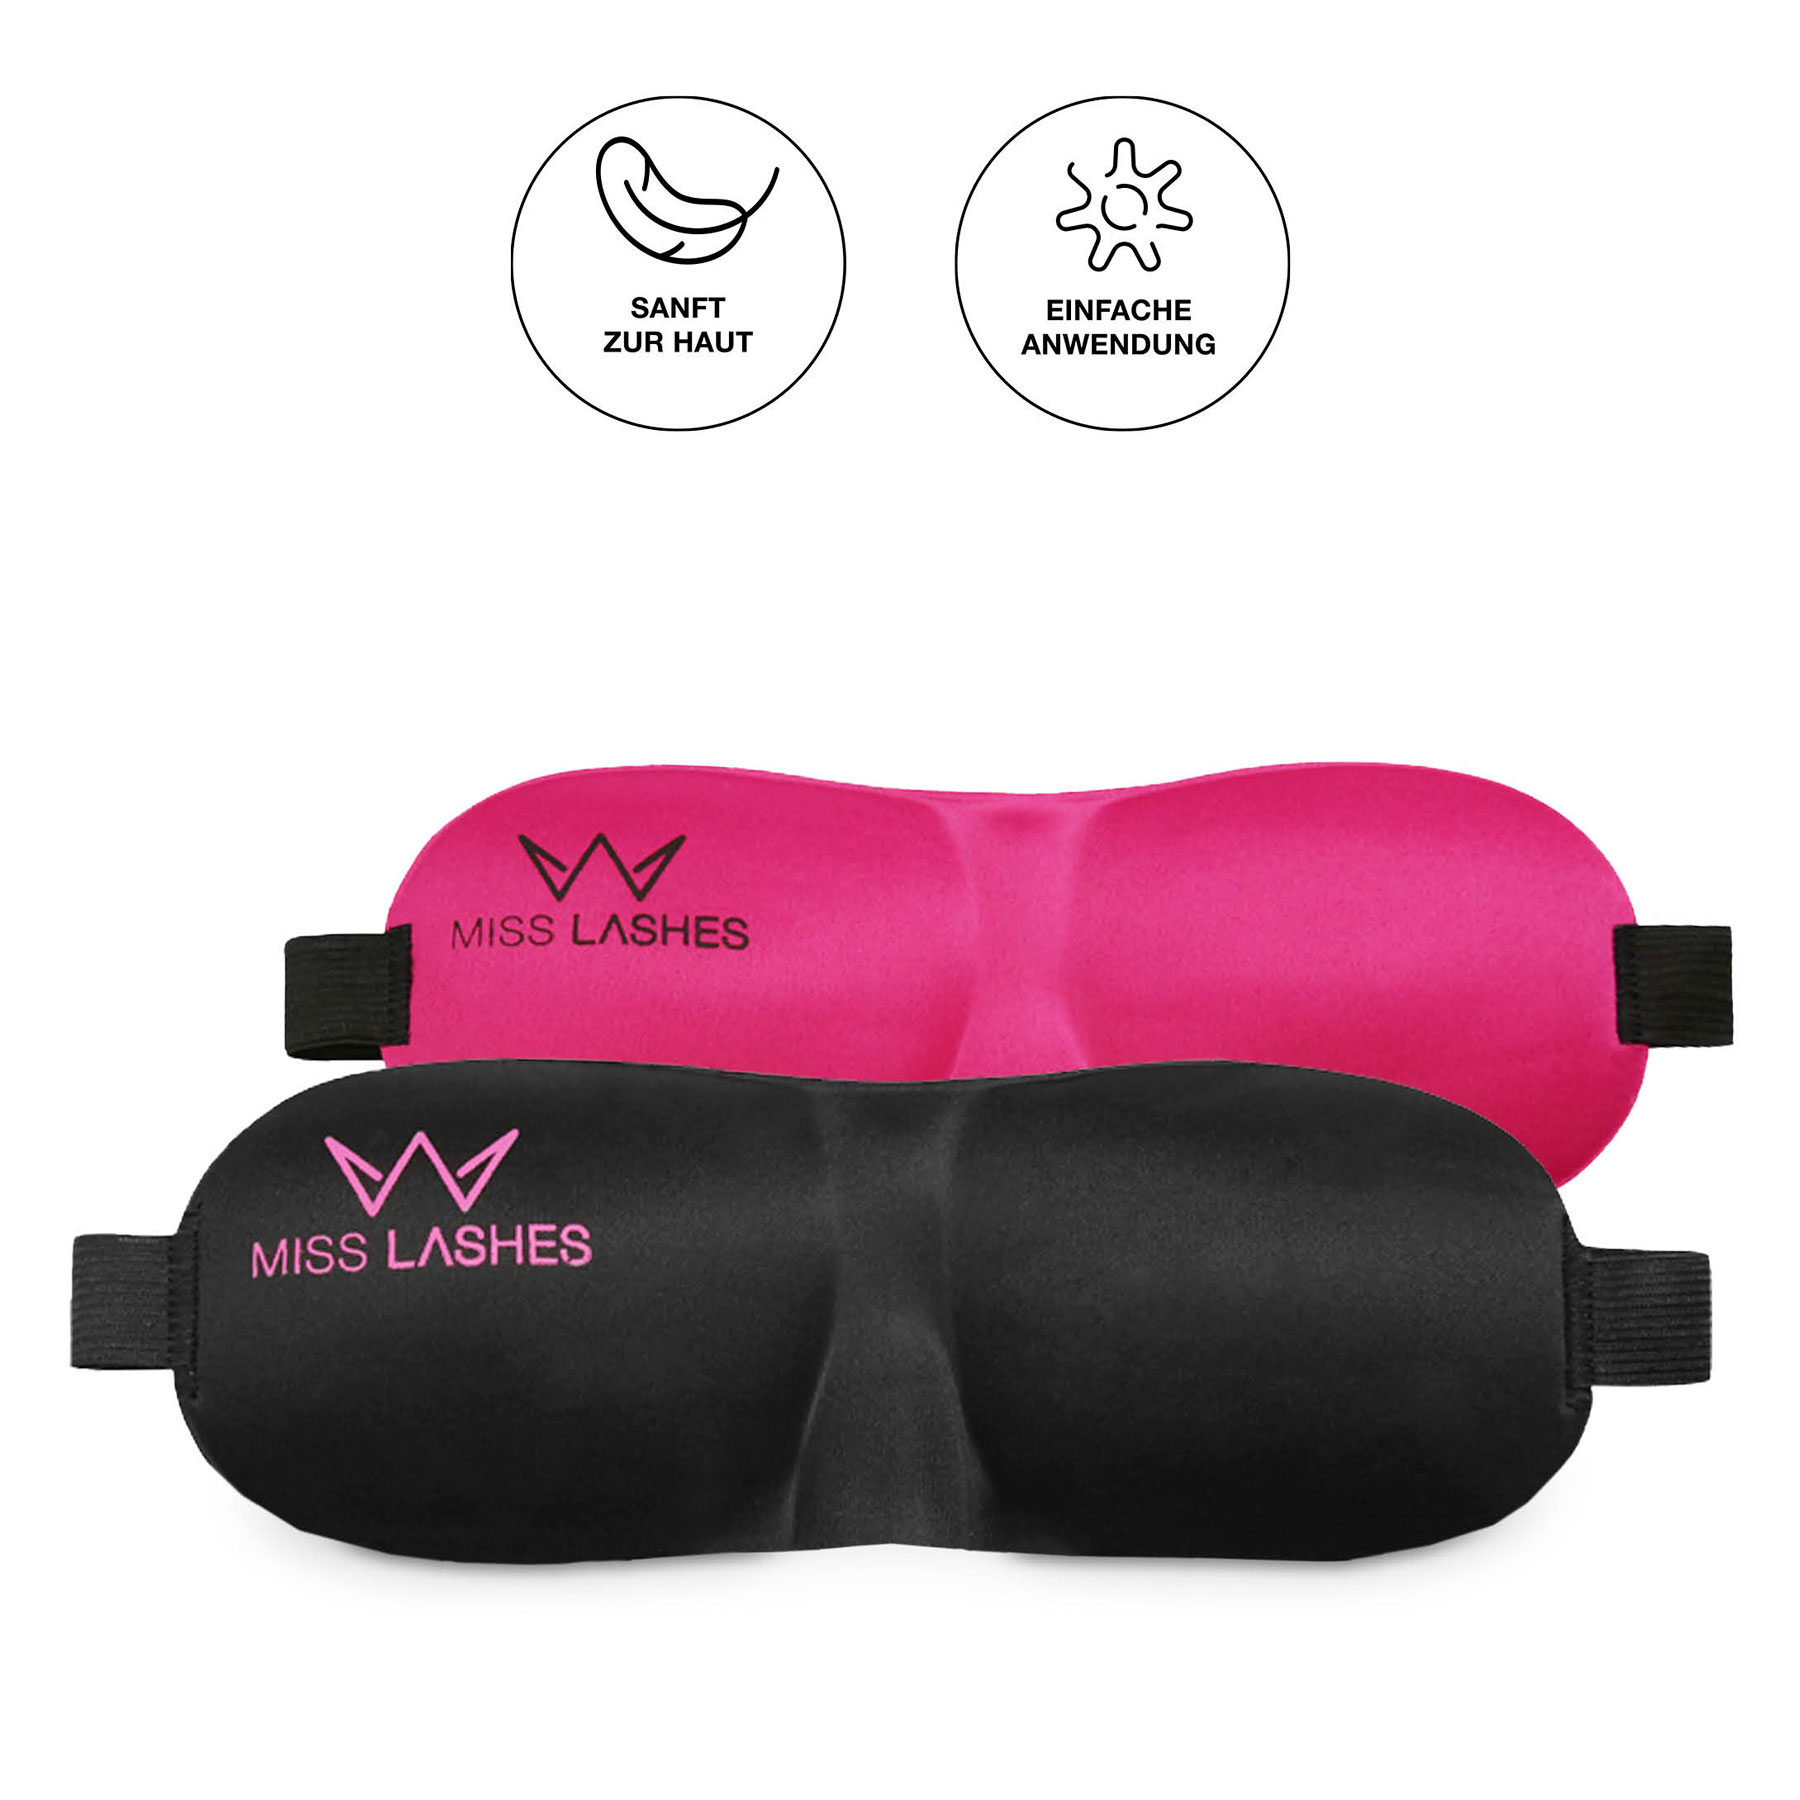 Sleep Mask | different colors